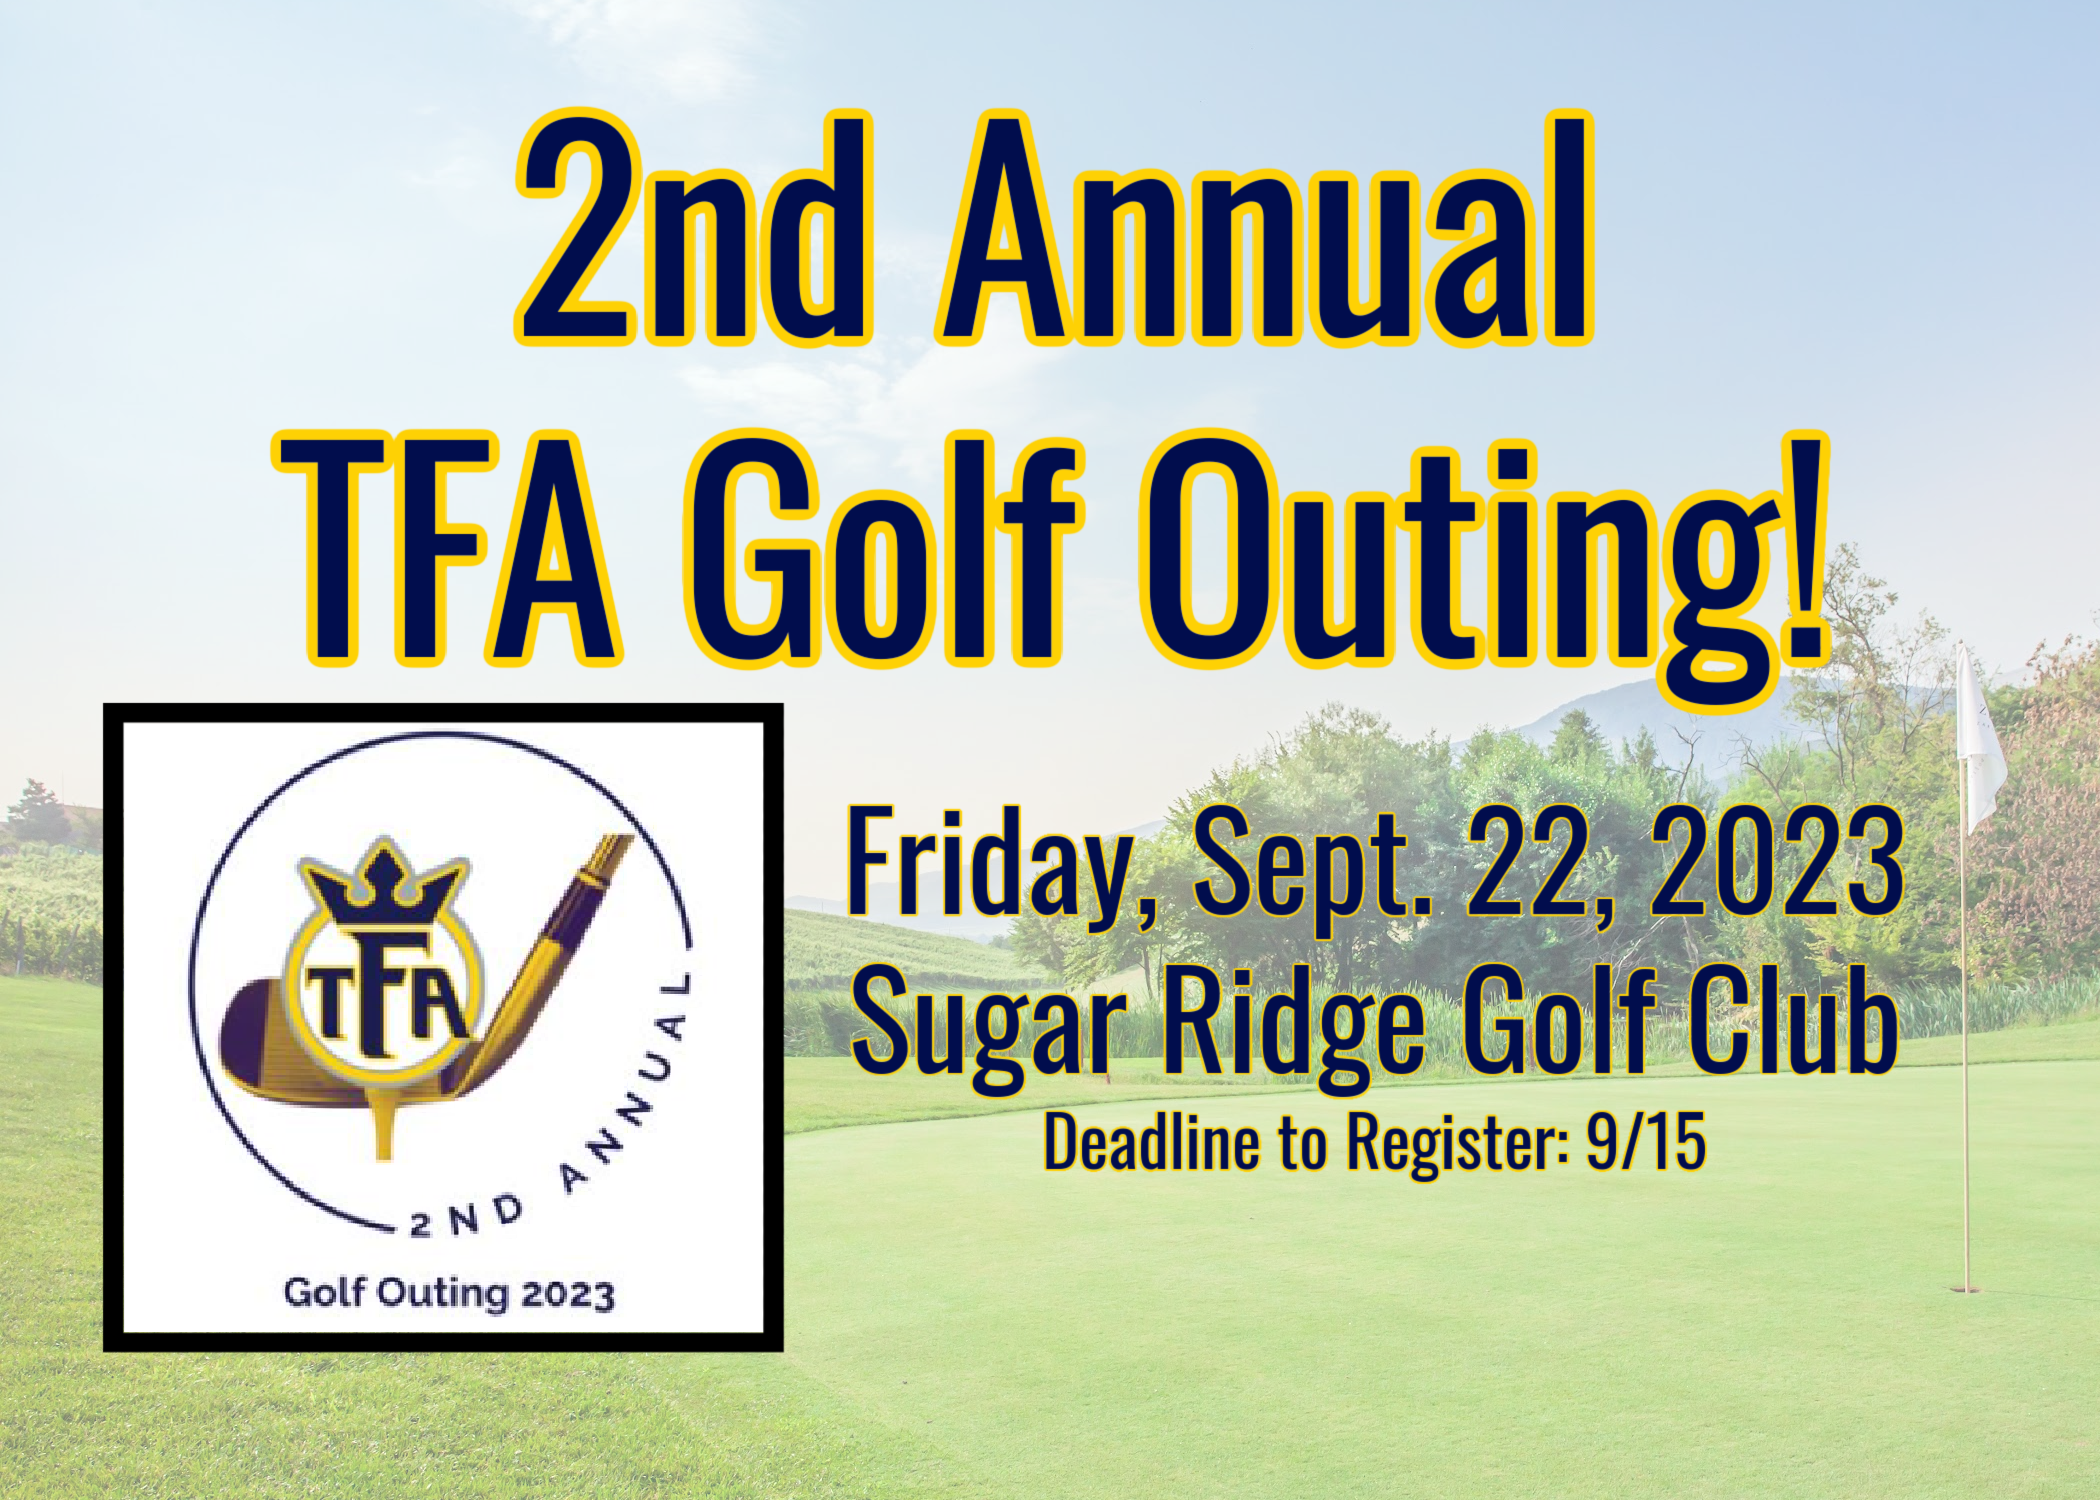 Thank you for attending TFA’s 2nd Annual Golf Outing!